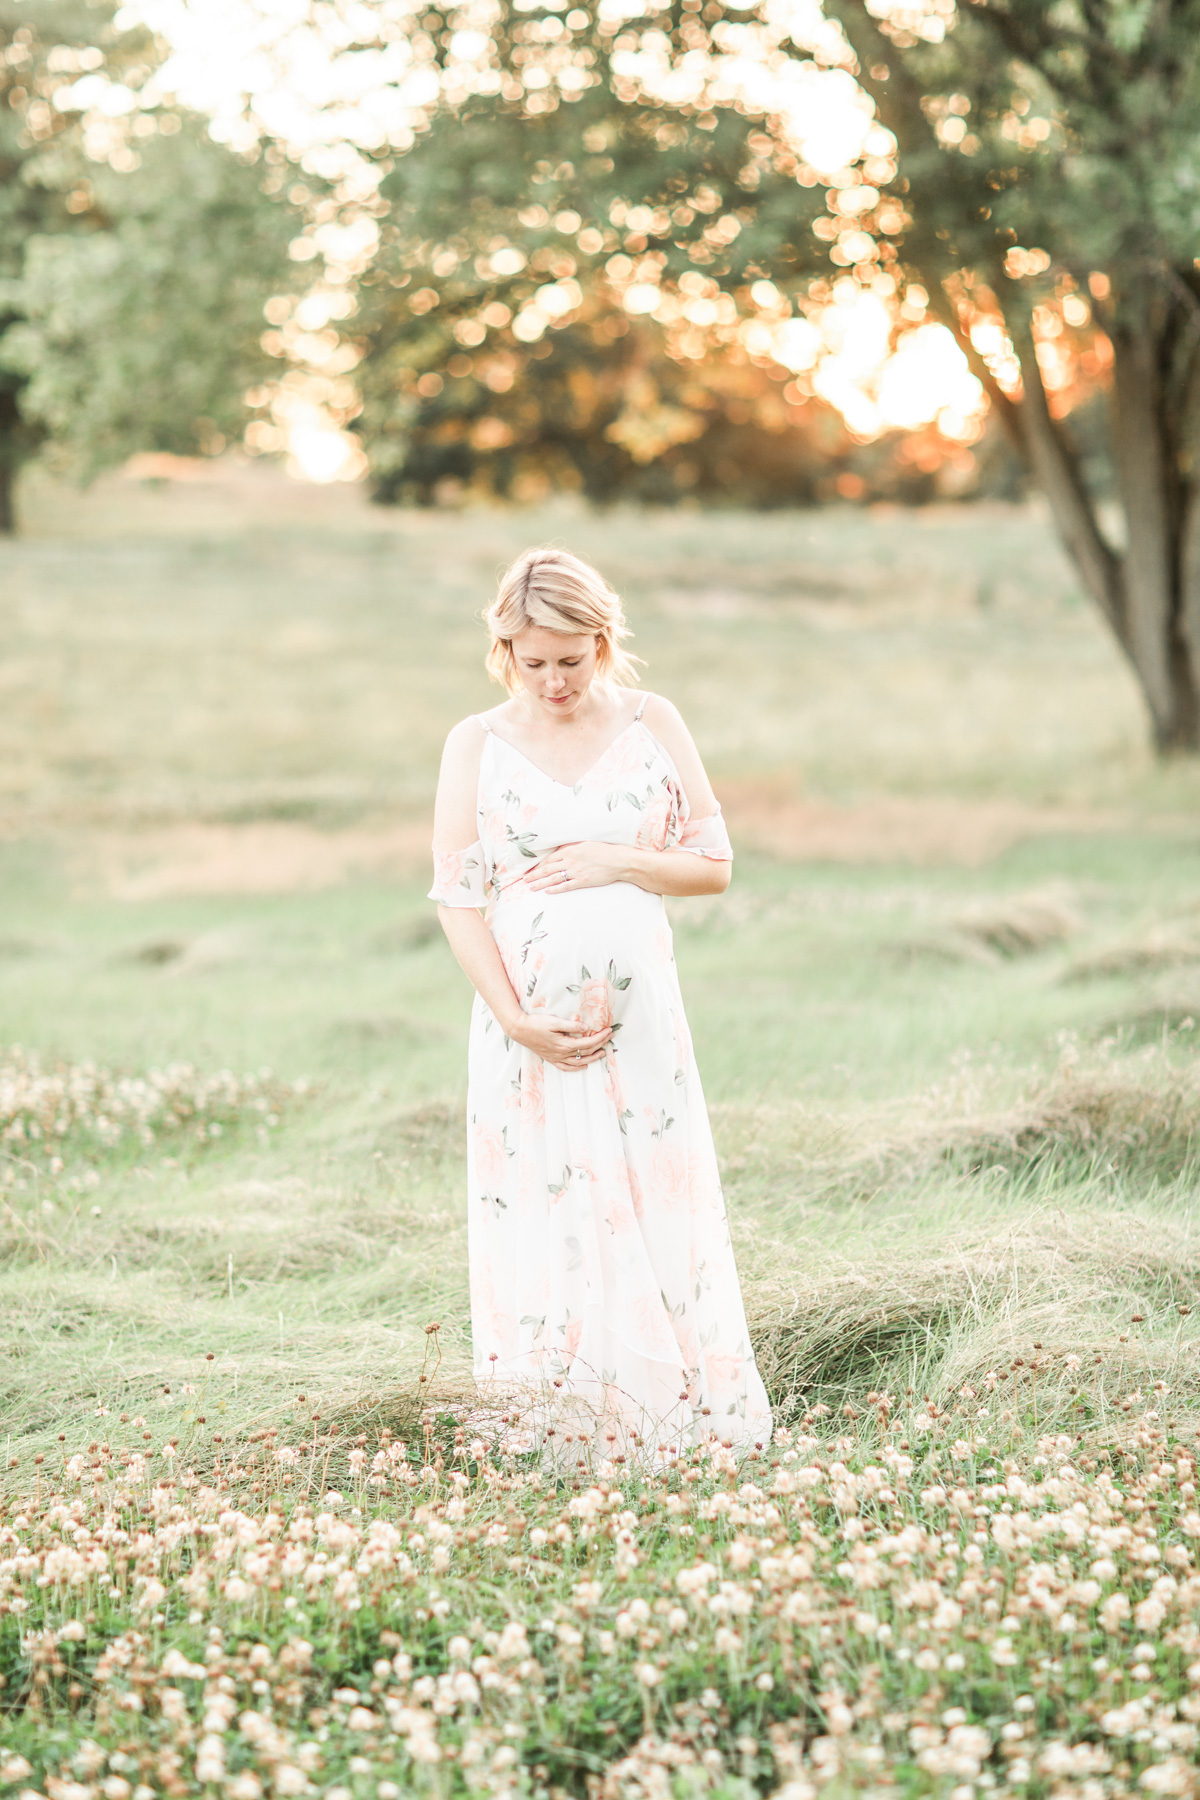 ERIN DAVISON PHOTOGRAPHY | Cleveland Maternity Photographer, Cleveland Newborn Photographers, Akron, Canton Ohio Maternity Photography, field maternity session, organic baby photography, natural light, light and airy,  film maternity